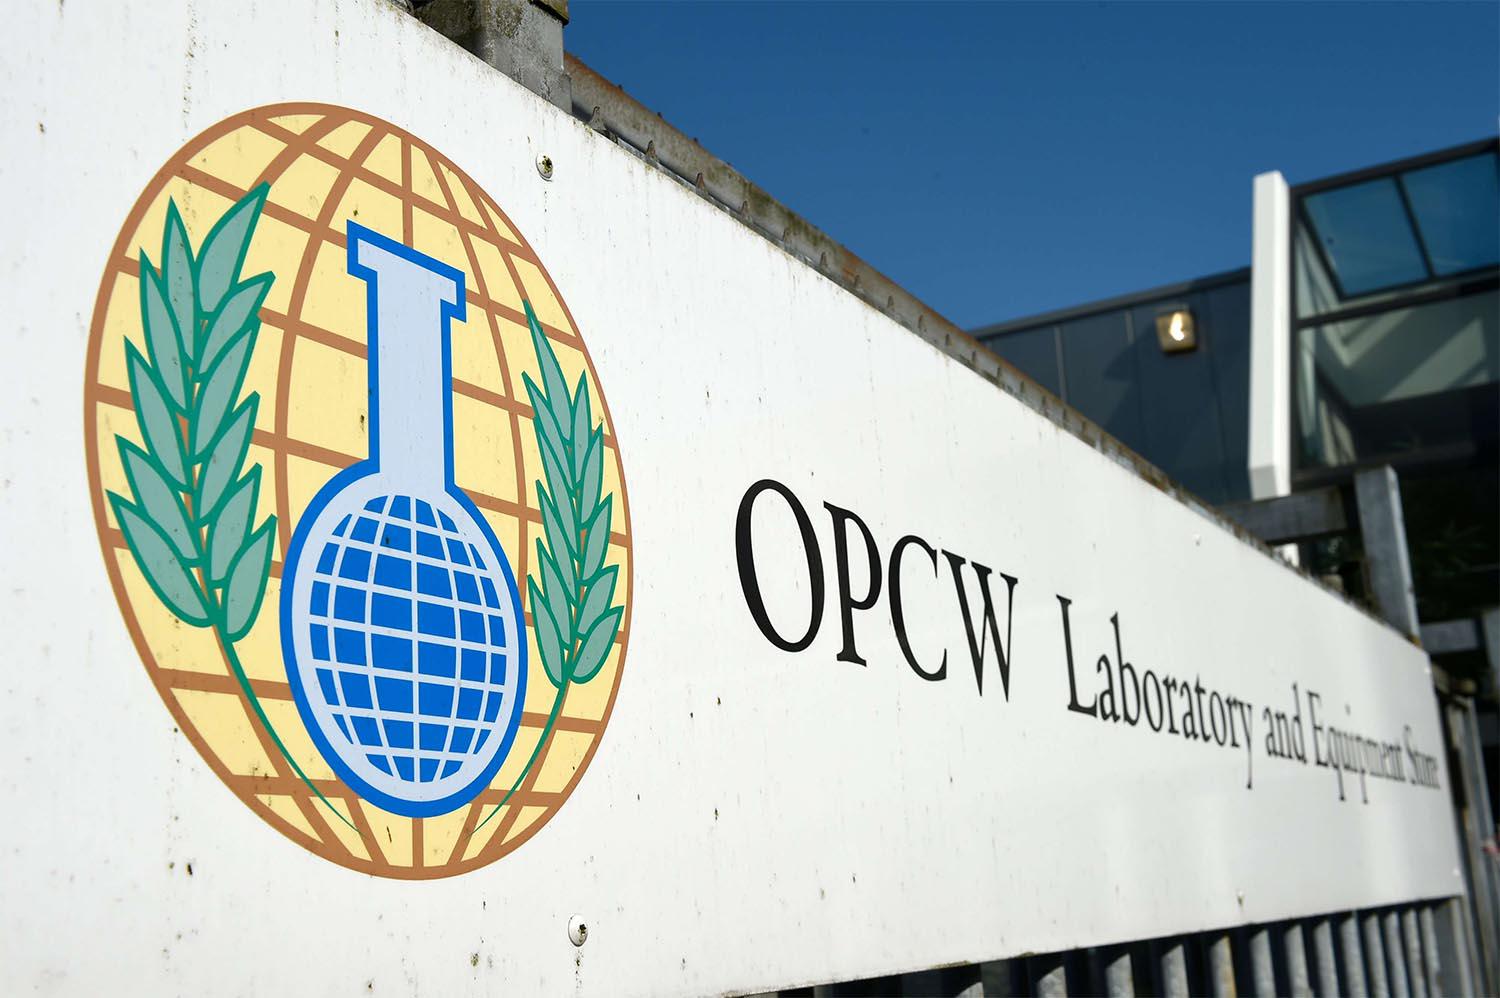 In April 2020, OPCW investigators blamed three chemical attacks in 2017 on the Syrian government